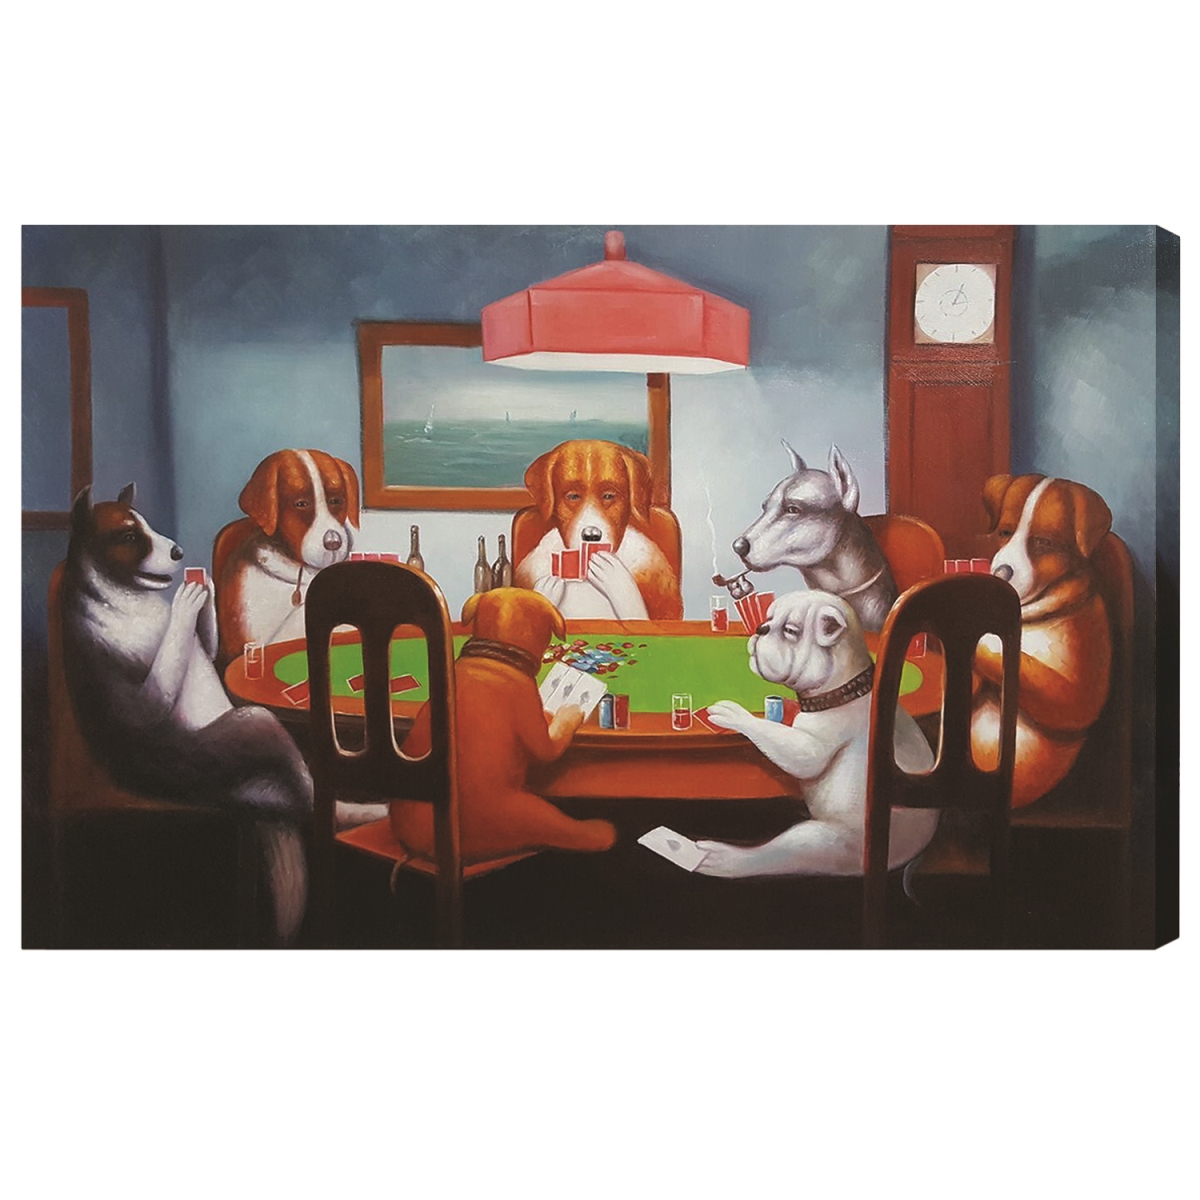 Picture of RAM Game Room OP10 36 x 24 in. Friend in Need Oil Painting on Canvas